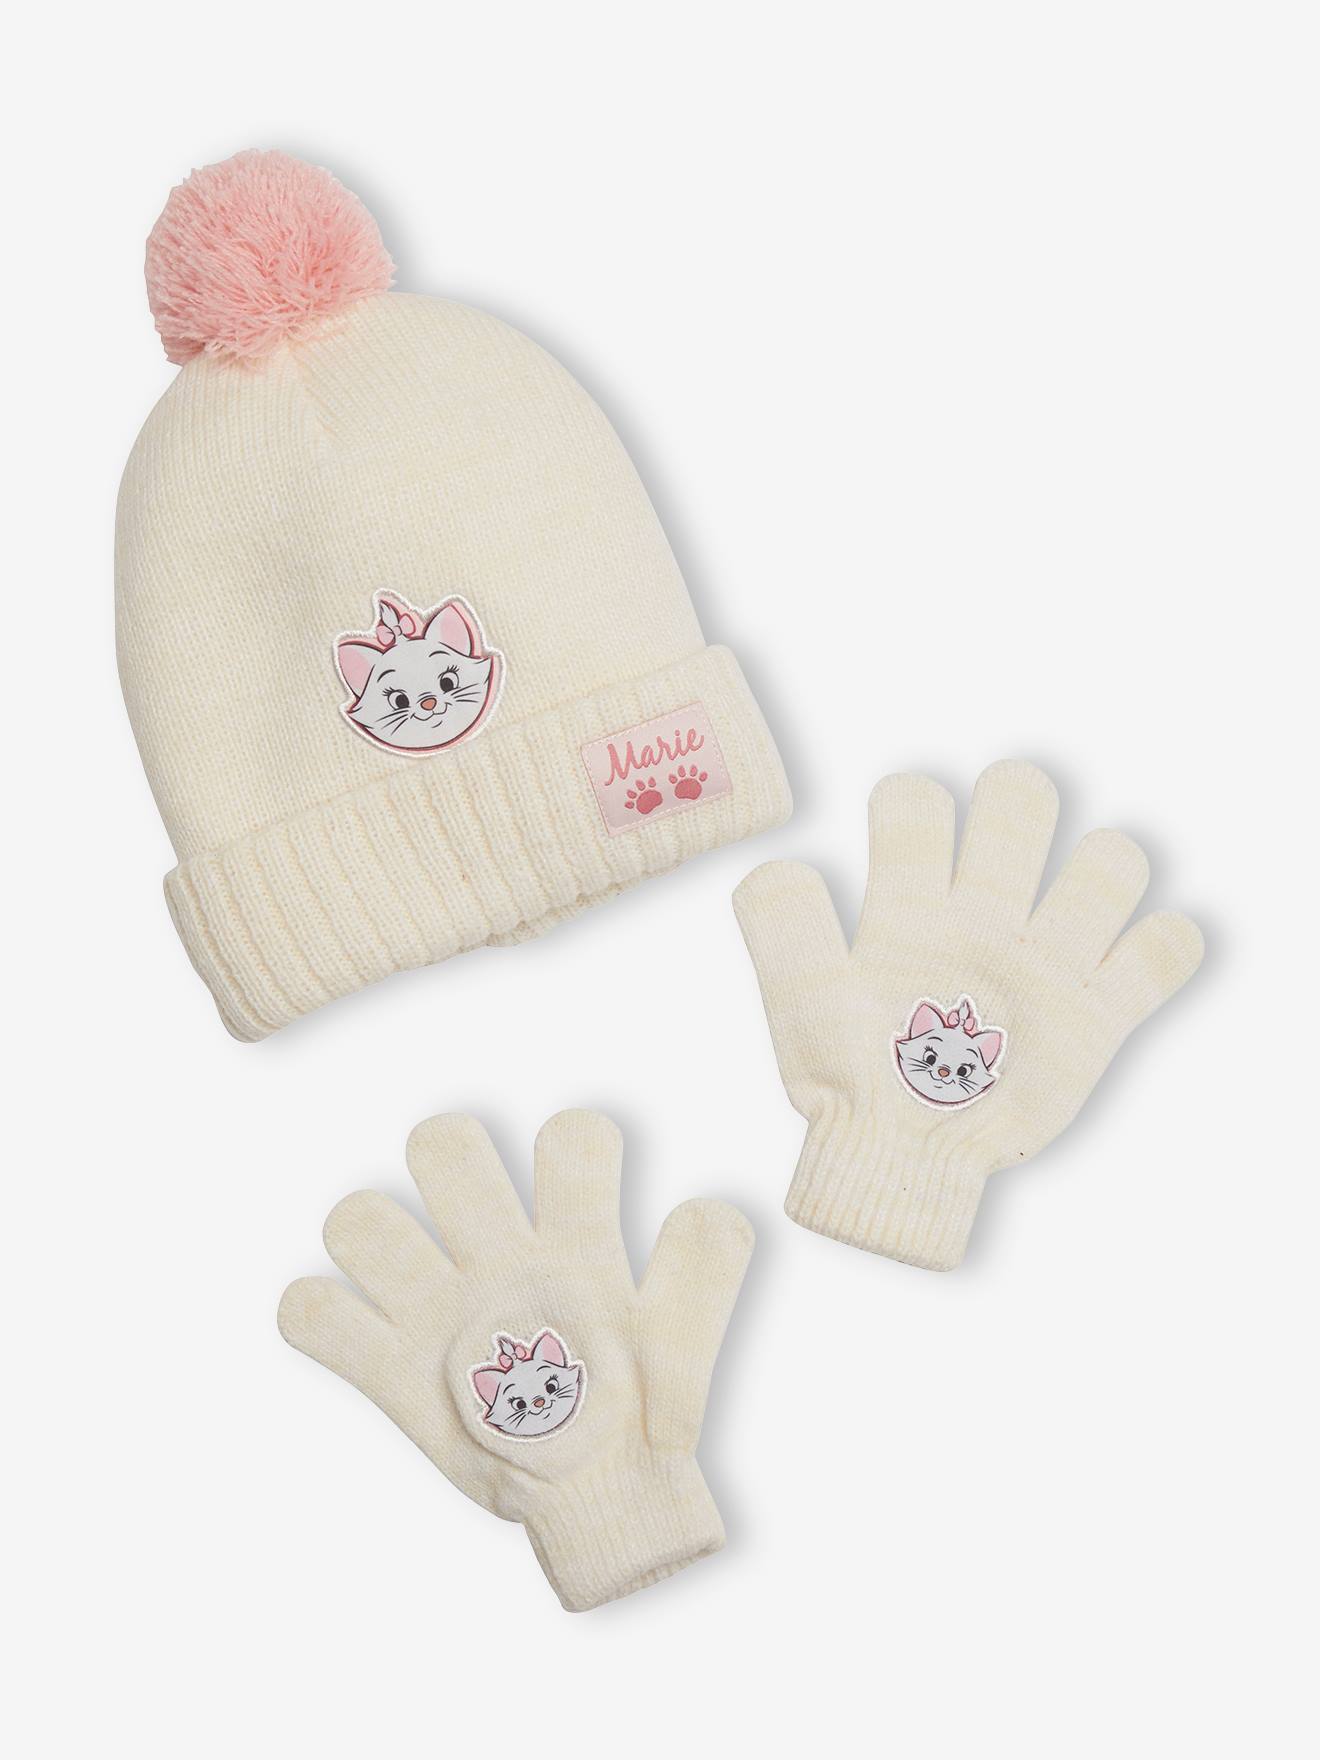 Marie of The Aristocats Beanie + Gloves Set for Girls, by Disney(r) beige light solid with design